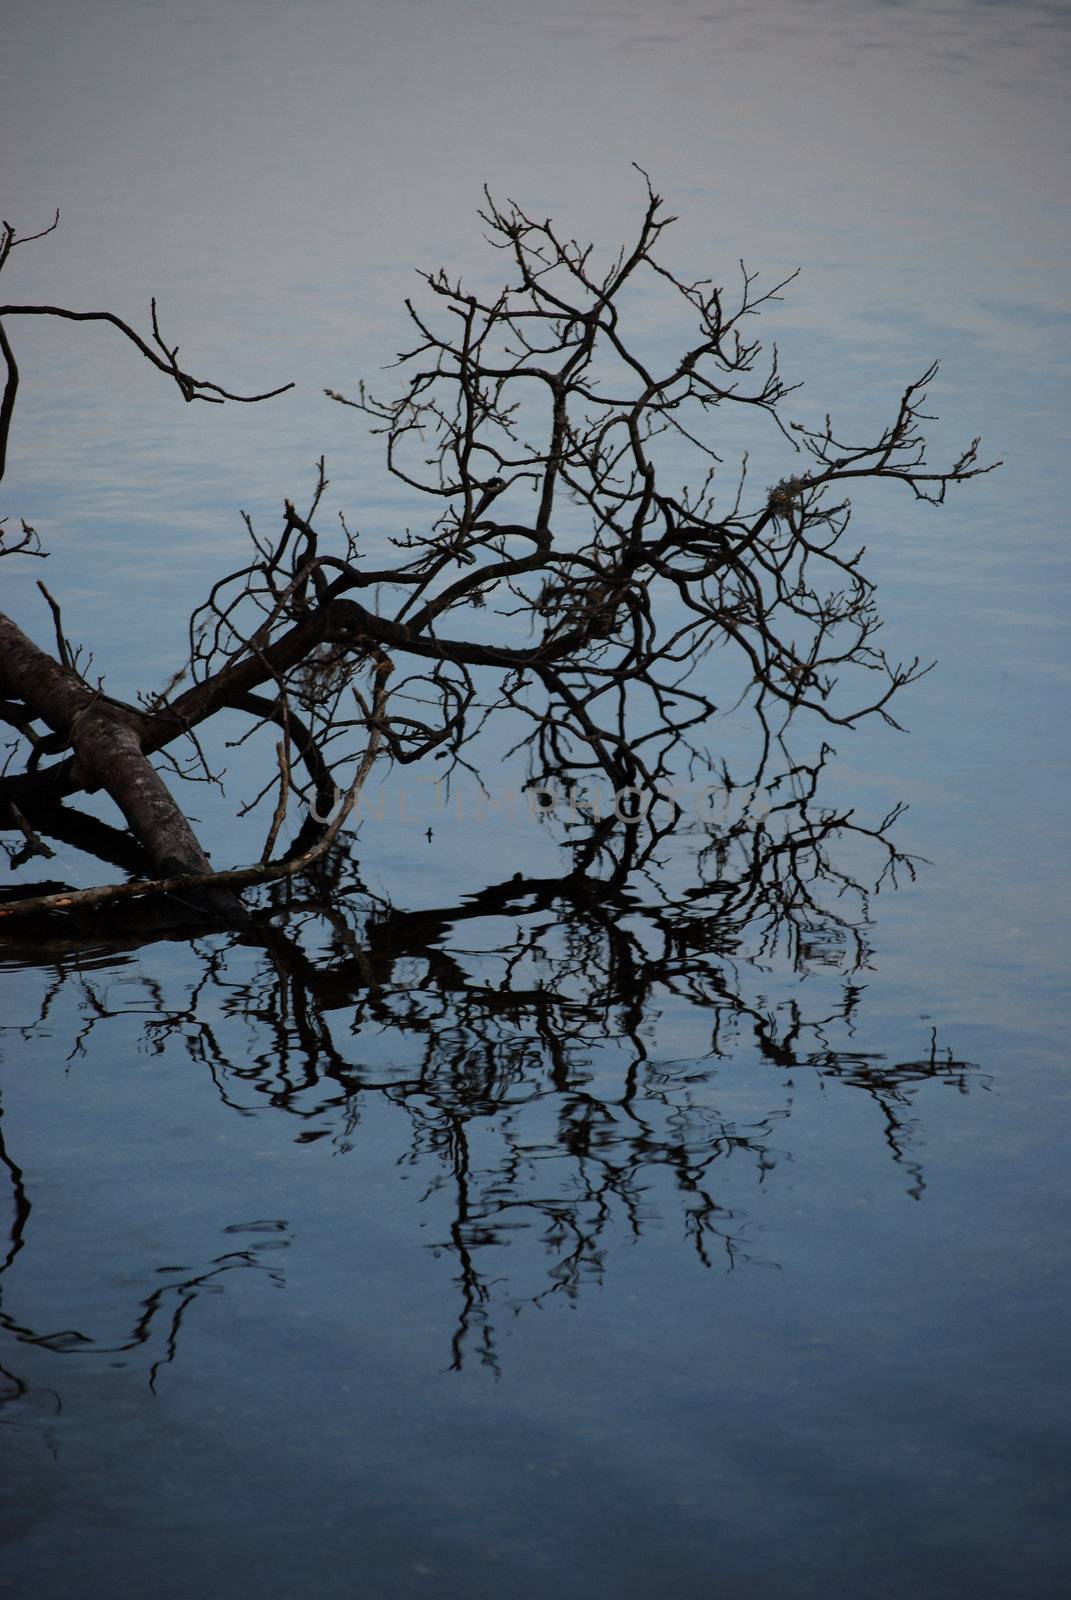 Tree and its reflection by Jule_Berlin